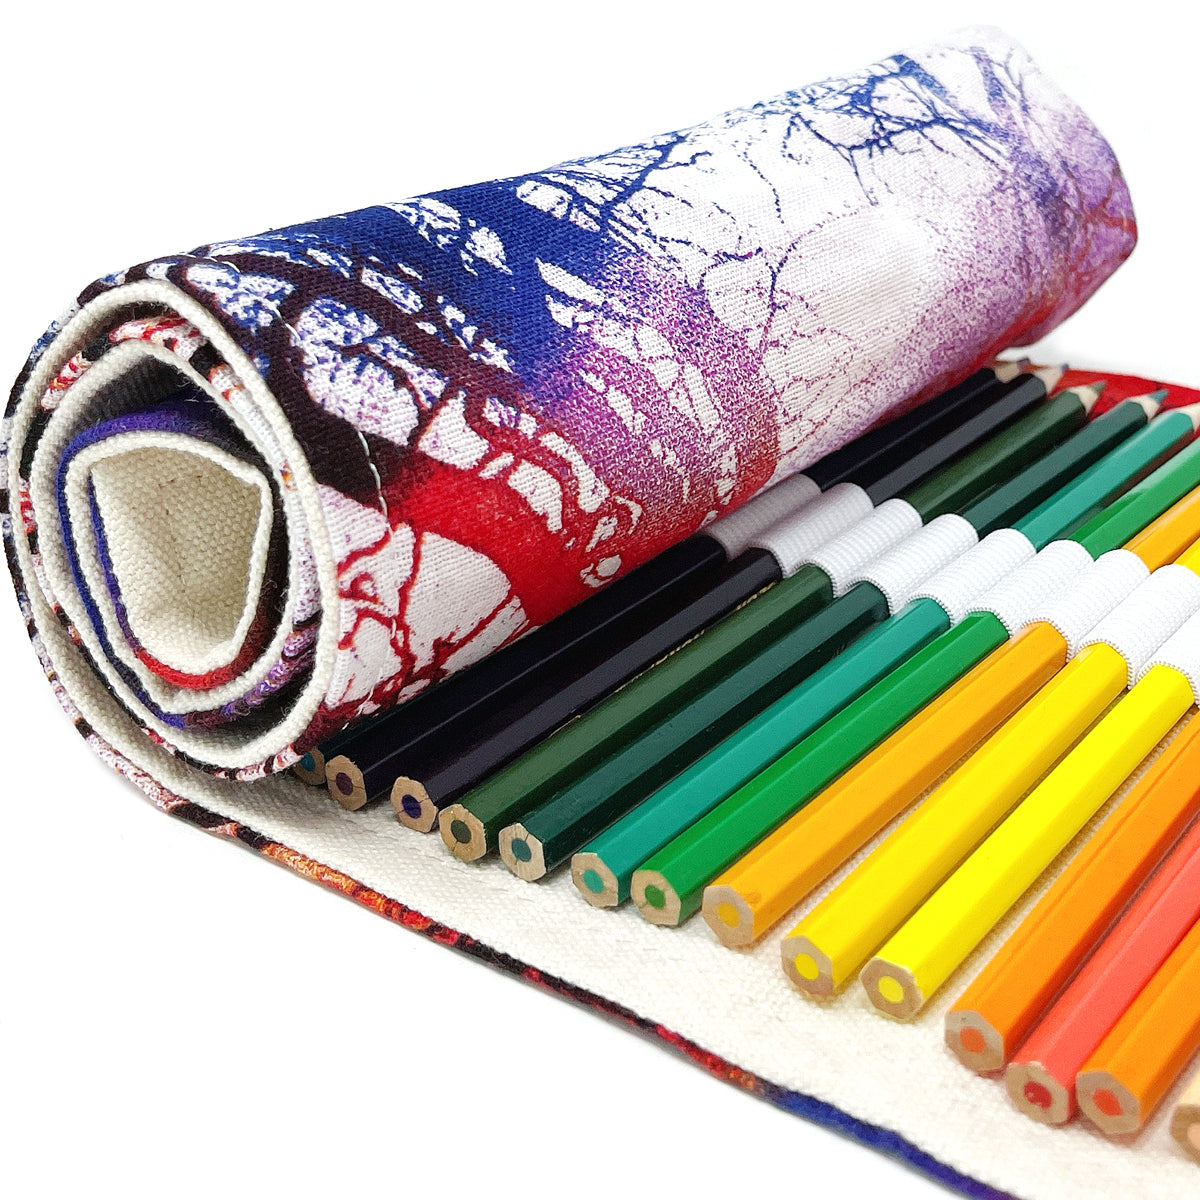 Gisneze 72 Colored Pencils with Roll Up Washable Canvas Pencil Bag Pouch for Artist Sketch, 2 Direction Buckle for Different Usage, Size: 19 in